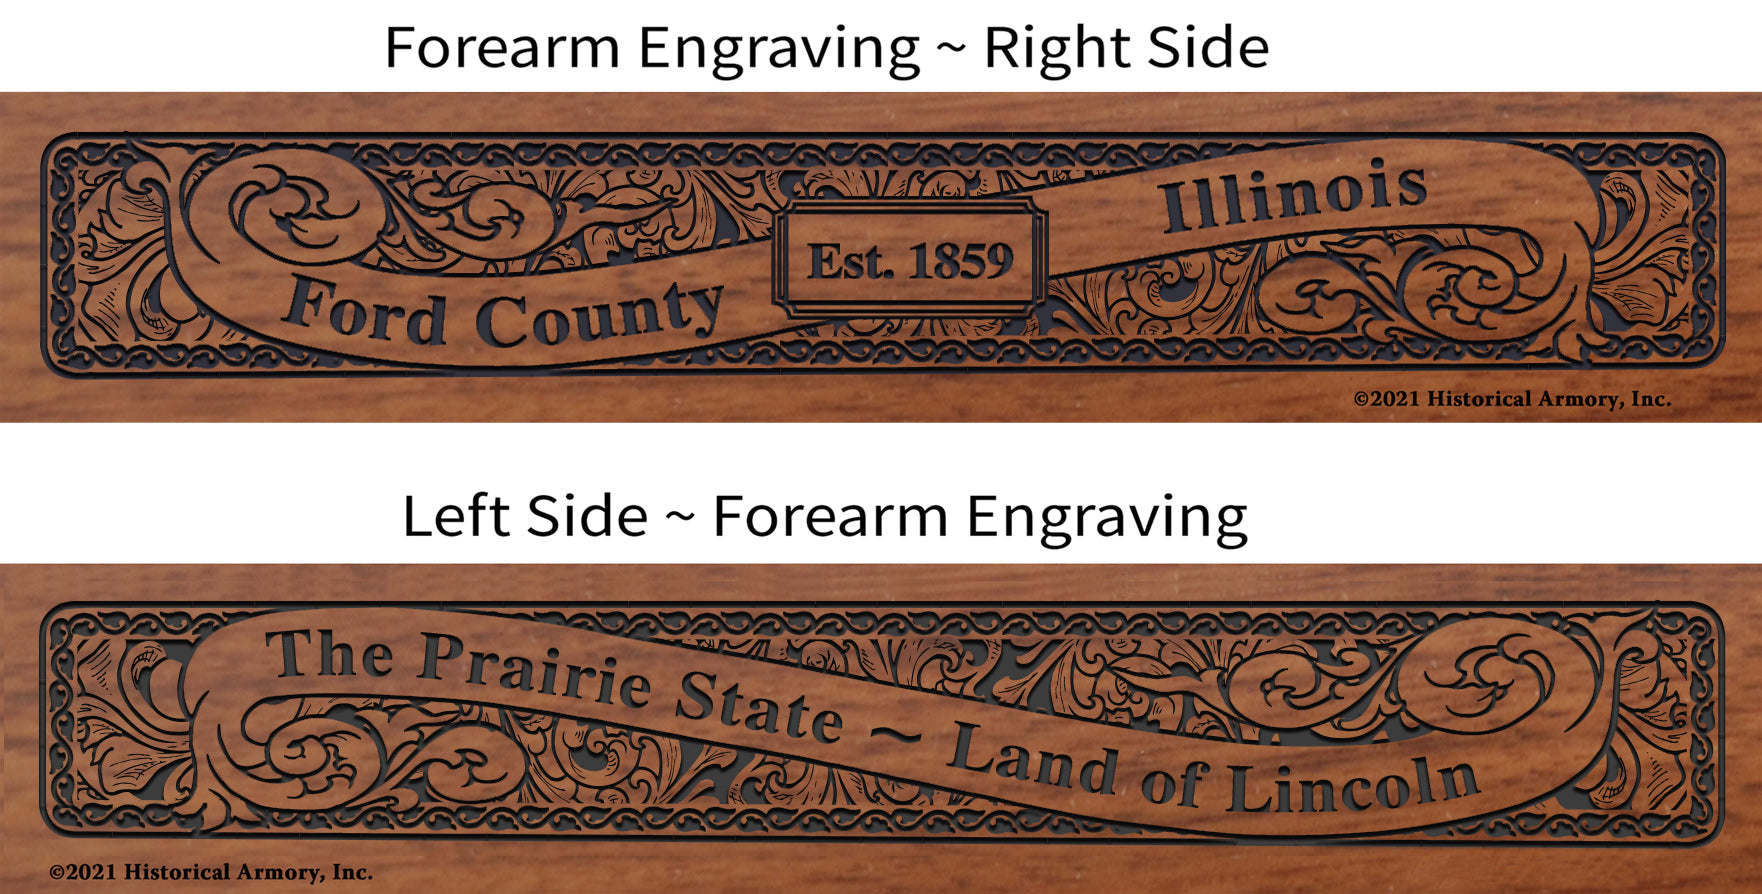 Ford County Illinois Establishment and Motto History Engraved Rifle Forearm